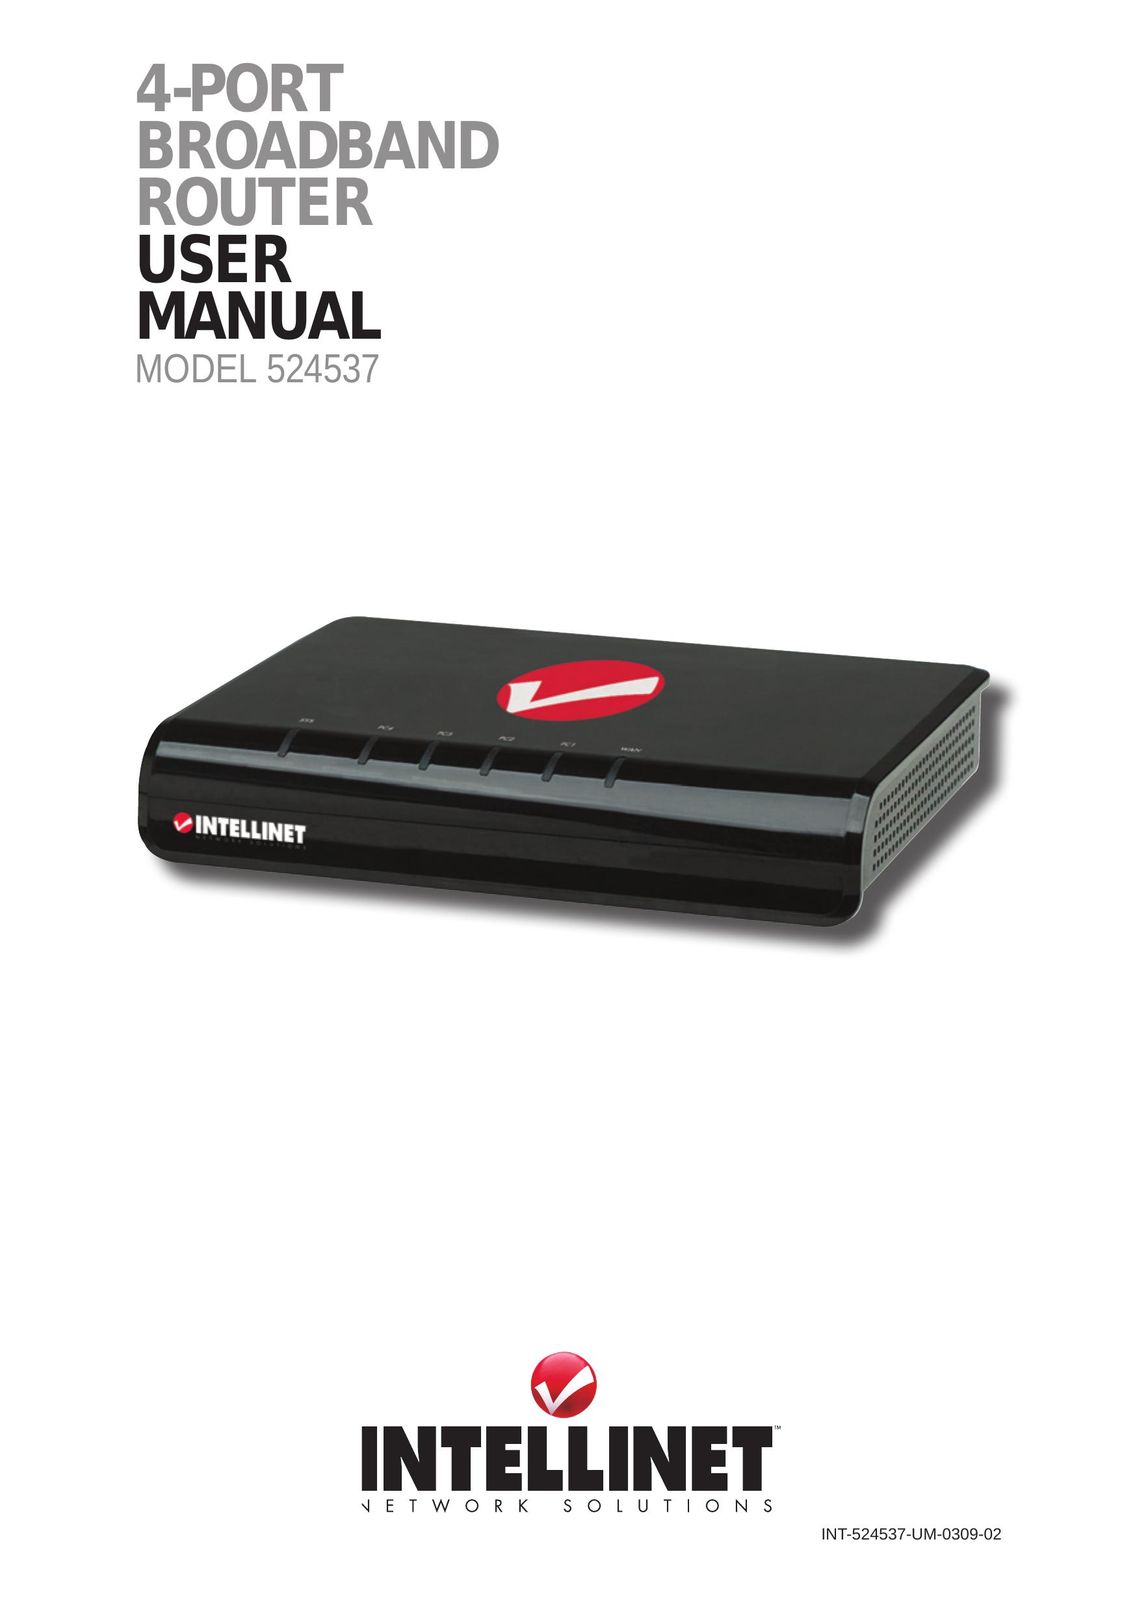 Intellinet Network Solutions 524537 Network Router User Manual